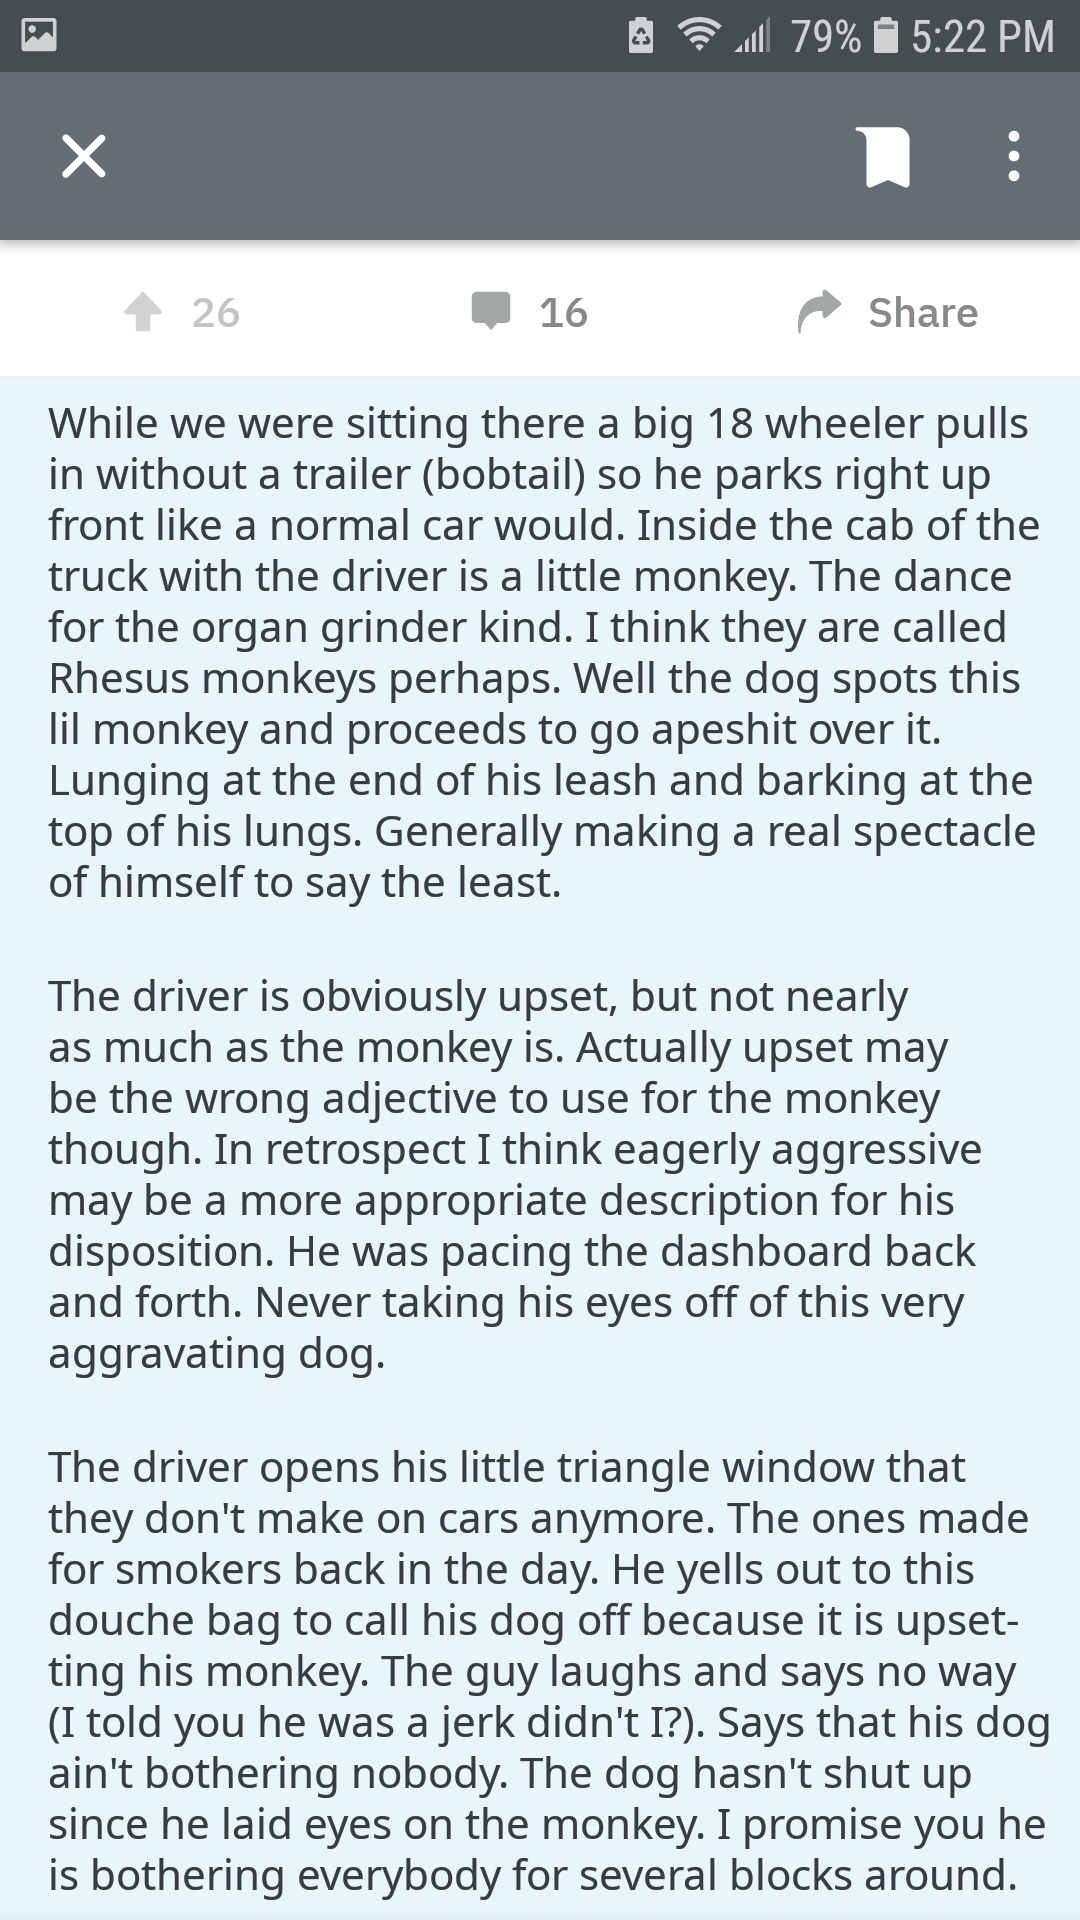 screenshot - 2 79% 26 While we were sitting there a big 18 wheeler pulls in without a trailer bobtail so he parks right up front a normal car would. Inside the cab of the truck with the driver is a little monkey. The dance for the organ grinder kind. I th